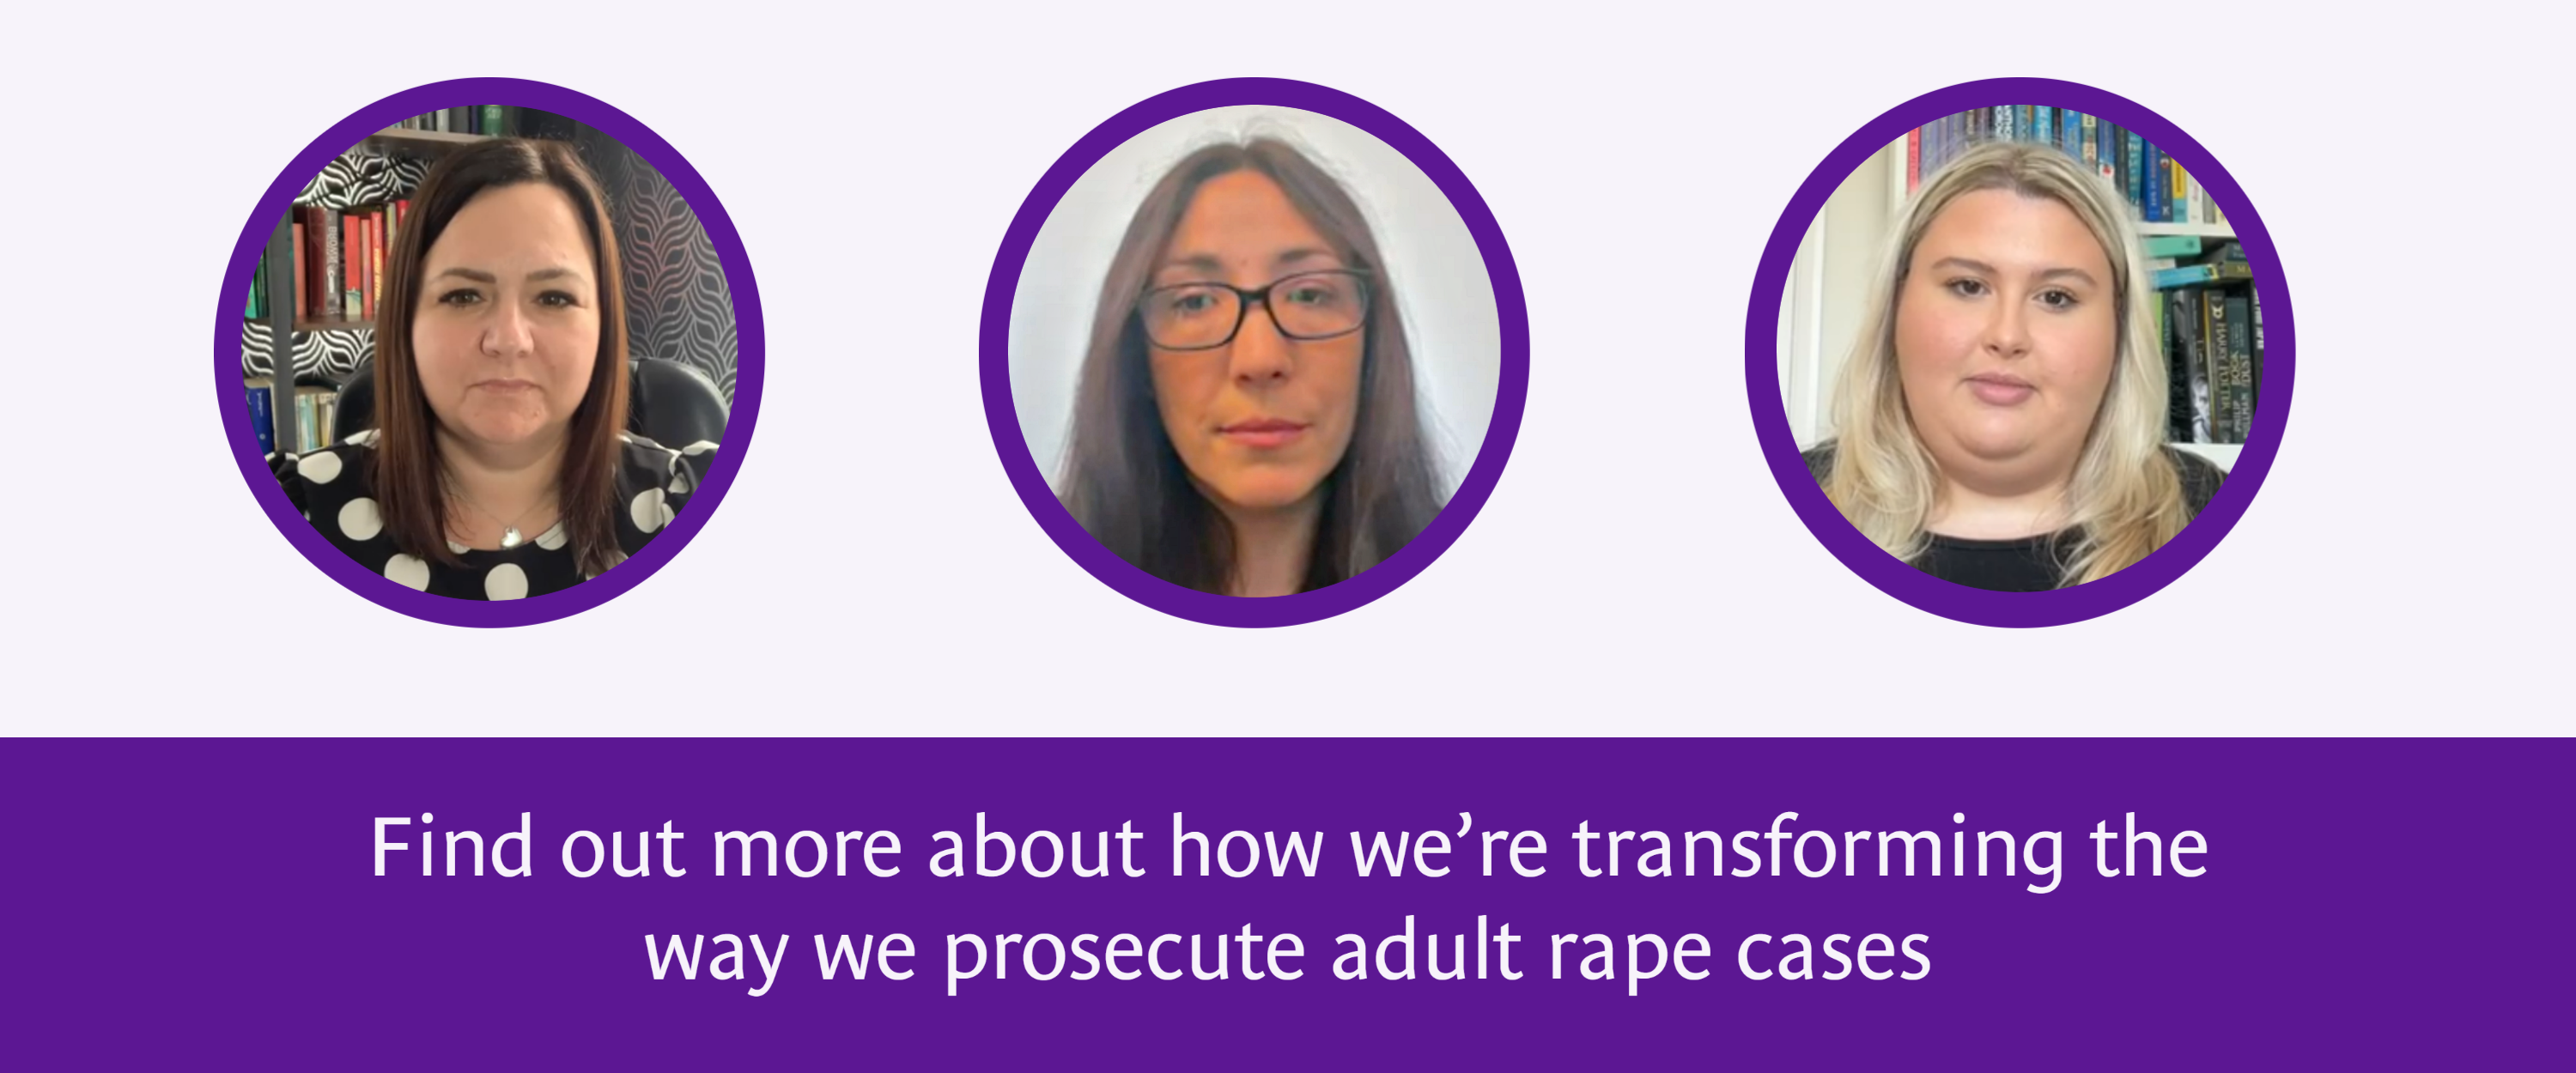 Photo of three women and text underneath which reads 'Find out more about how we’re transforming the way we prosecute adult rape cases'